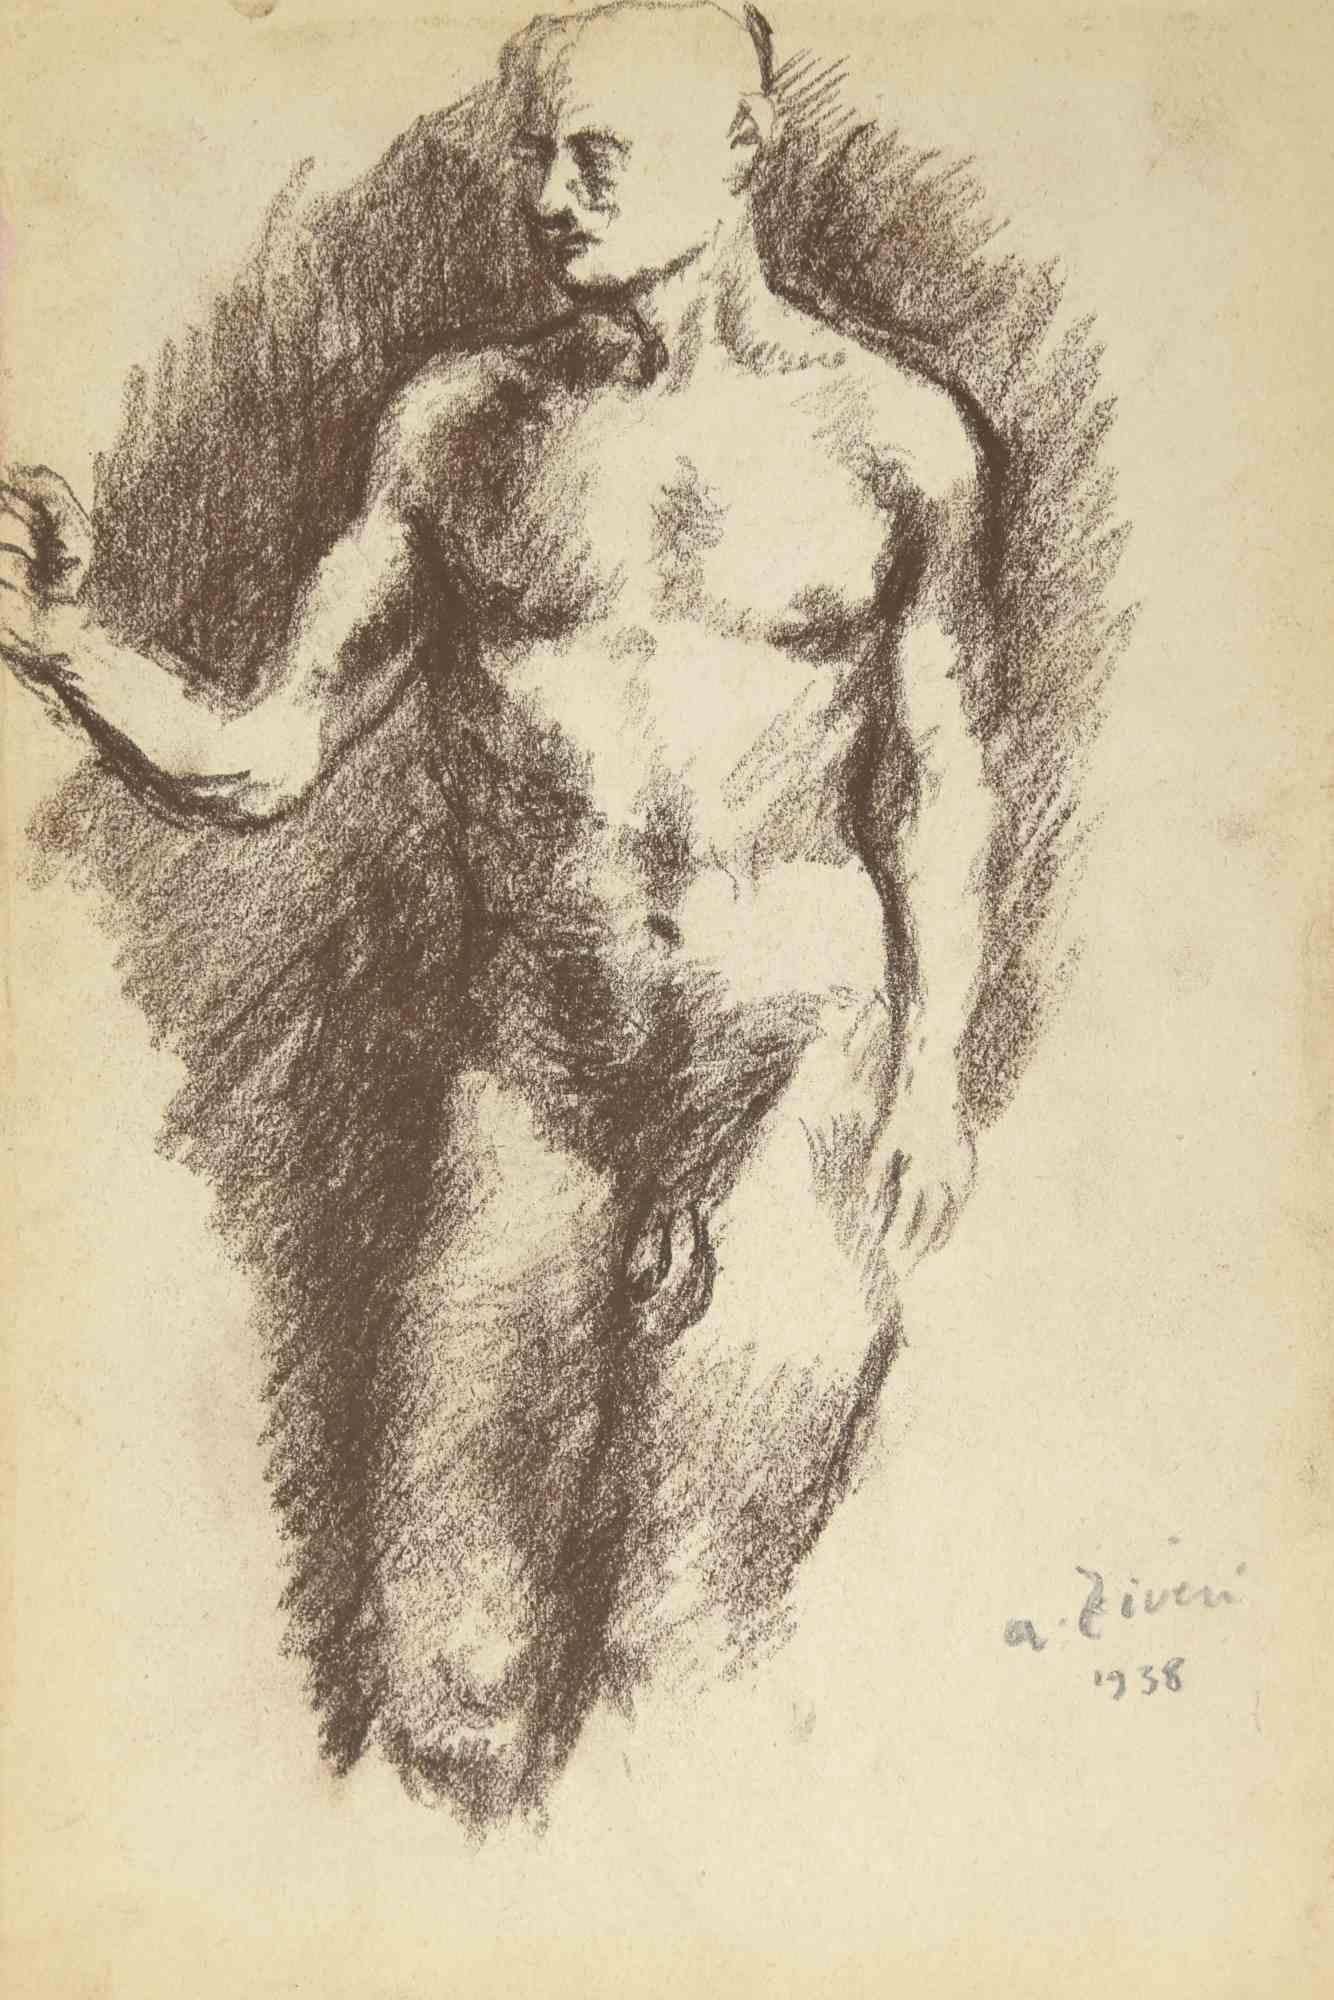 The Nude is a drawing realized by Alberto Ziveri in 1938.

Hand-signed.
In good conditions. 

The artwork is represented through deft strokes masterly.

Alberto Ziveri (Rome,1908 – 1990), the Italian painter of the Roman school, author of urban